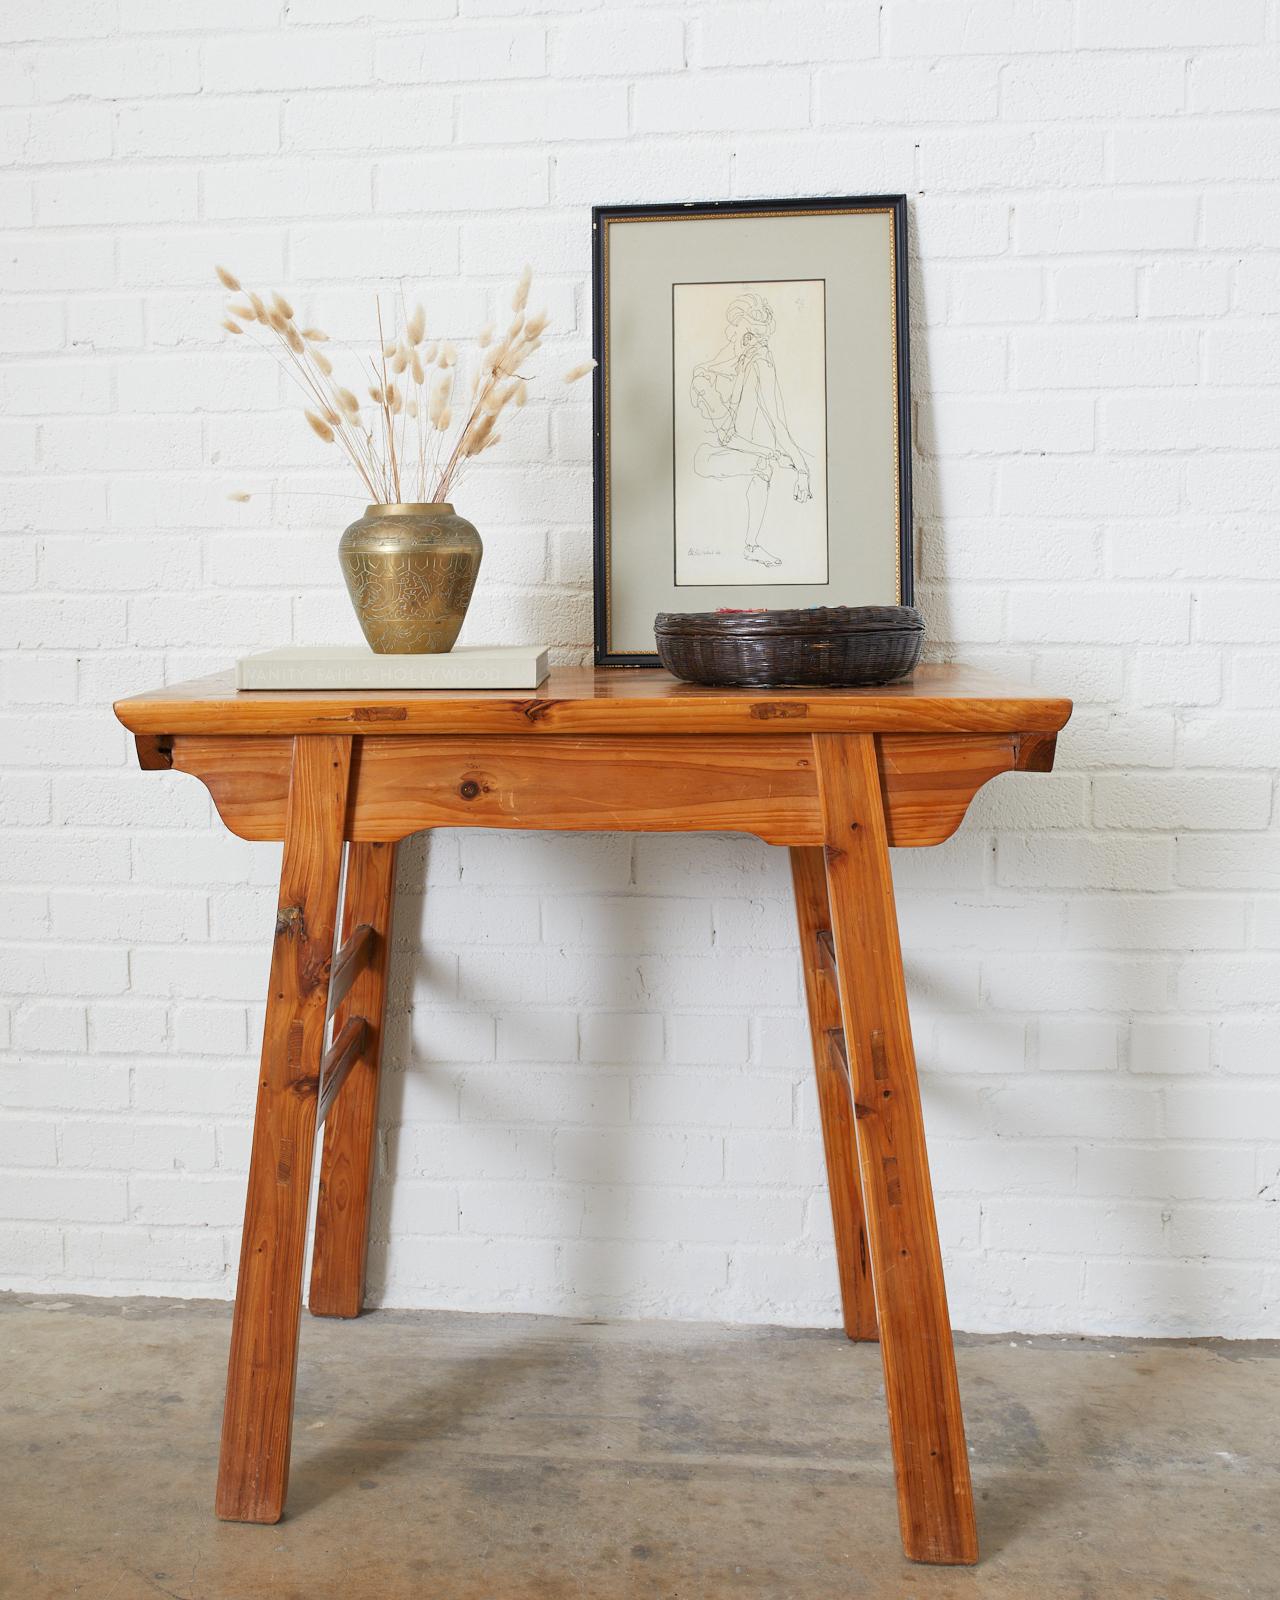 Chinese Ming style wooden wine table featuring a floating top panel and a simple carved apron and spandrels. Finished in a light natural clear lacquer. It has square legs and dual stretchers on each side of the splayed legs. Mortise and tenon